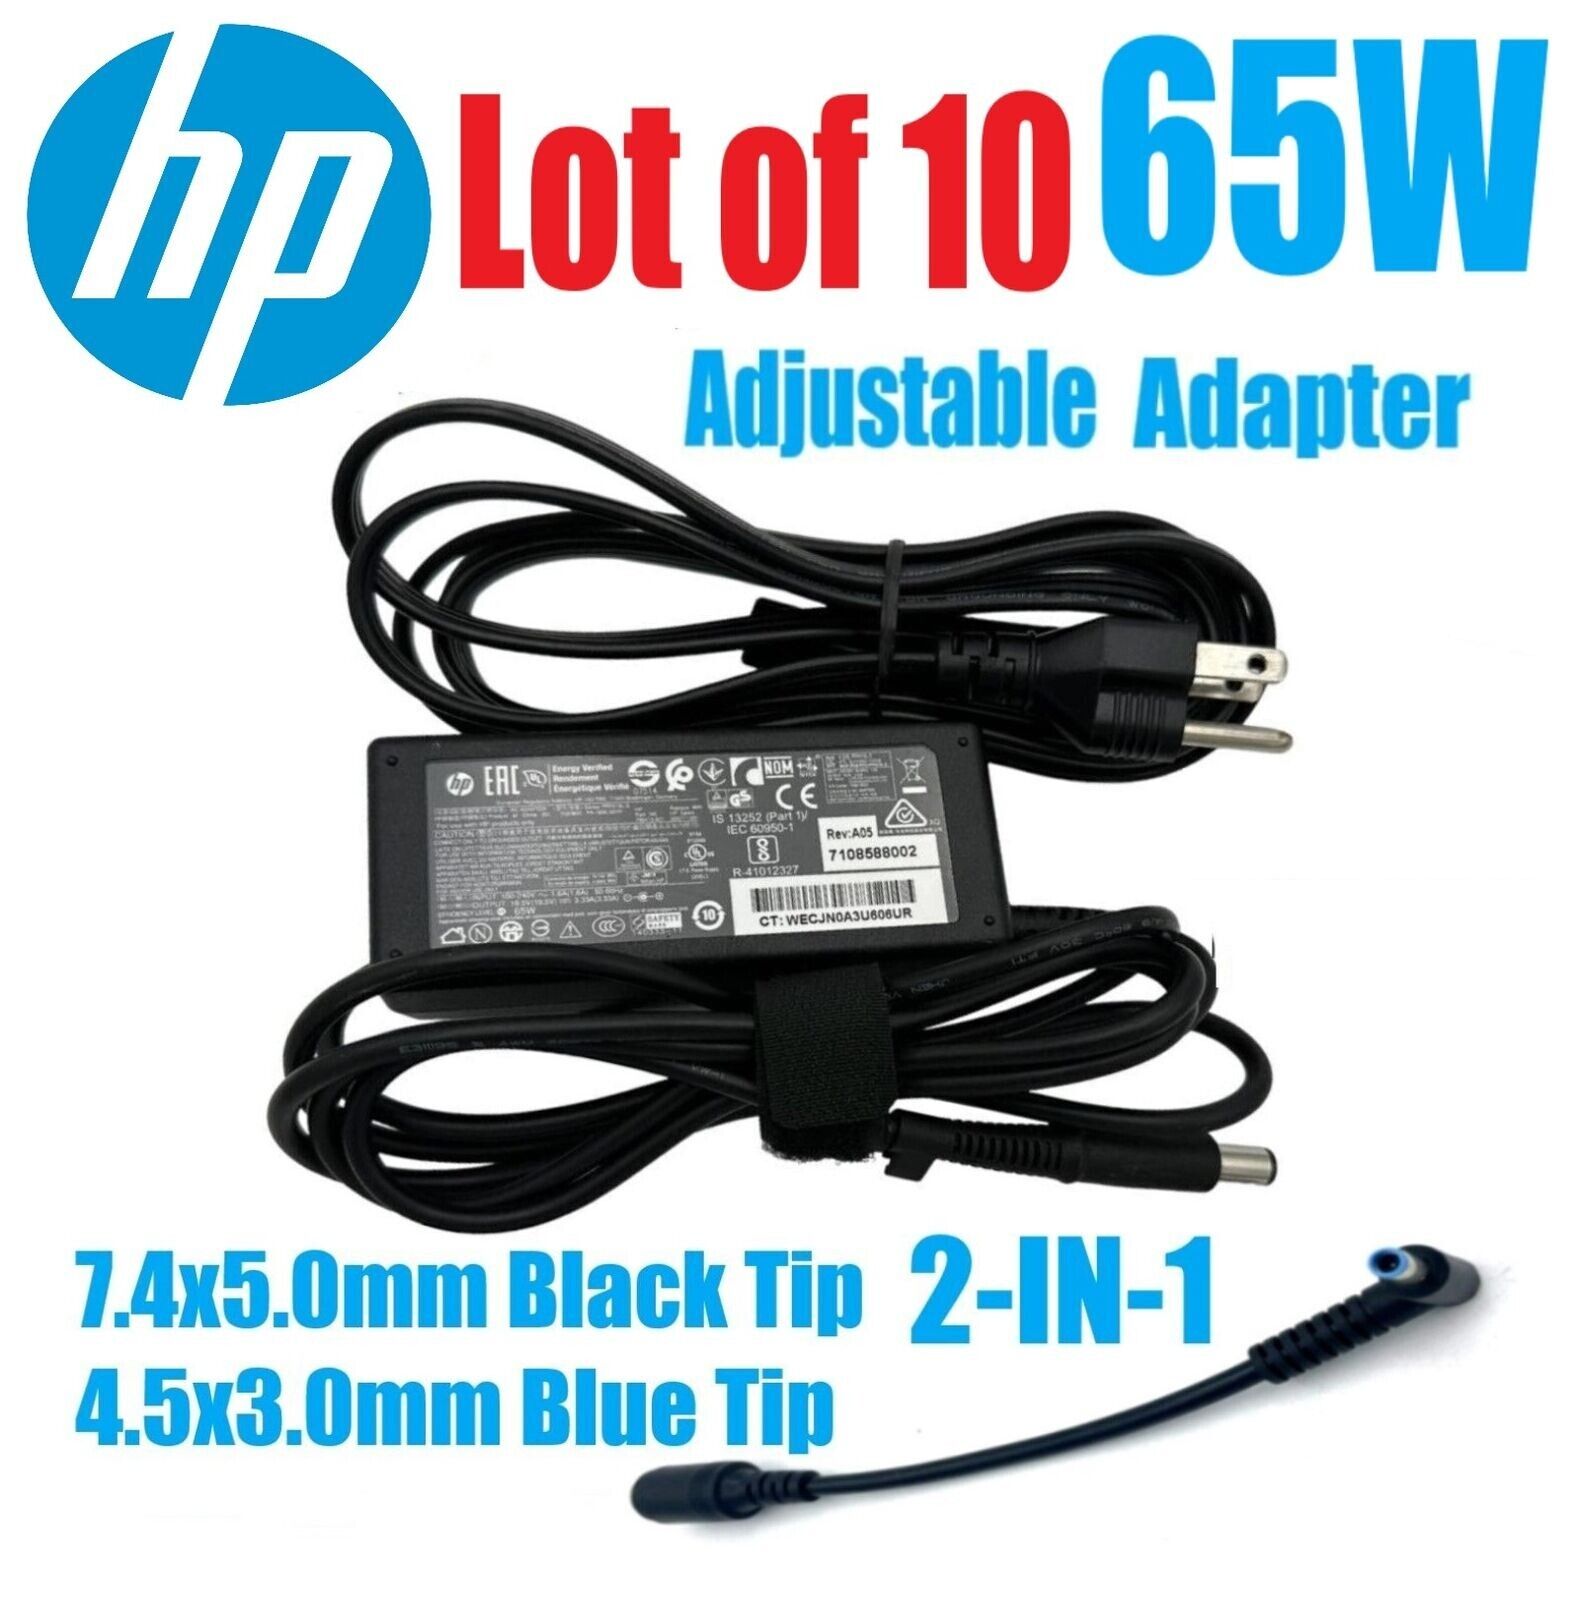 LOT OF 10 65W USB C Type Adapter Power Charger For HP Adjustable 4.5mm Blue Tip